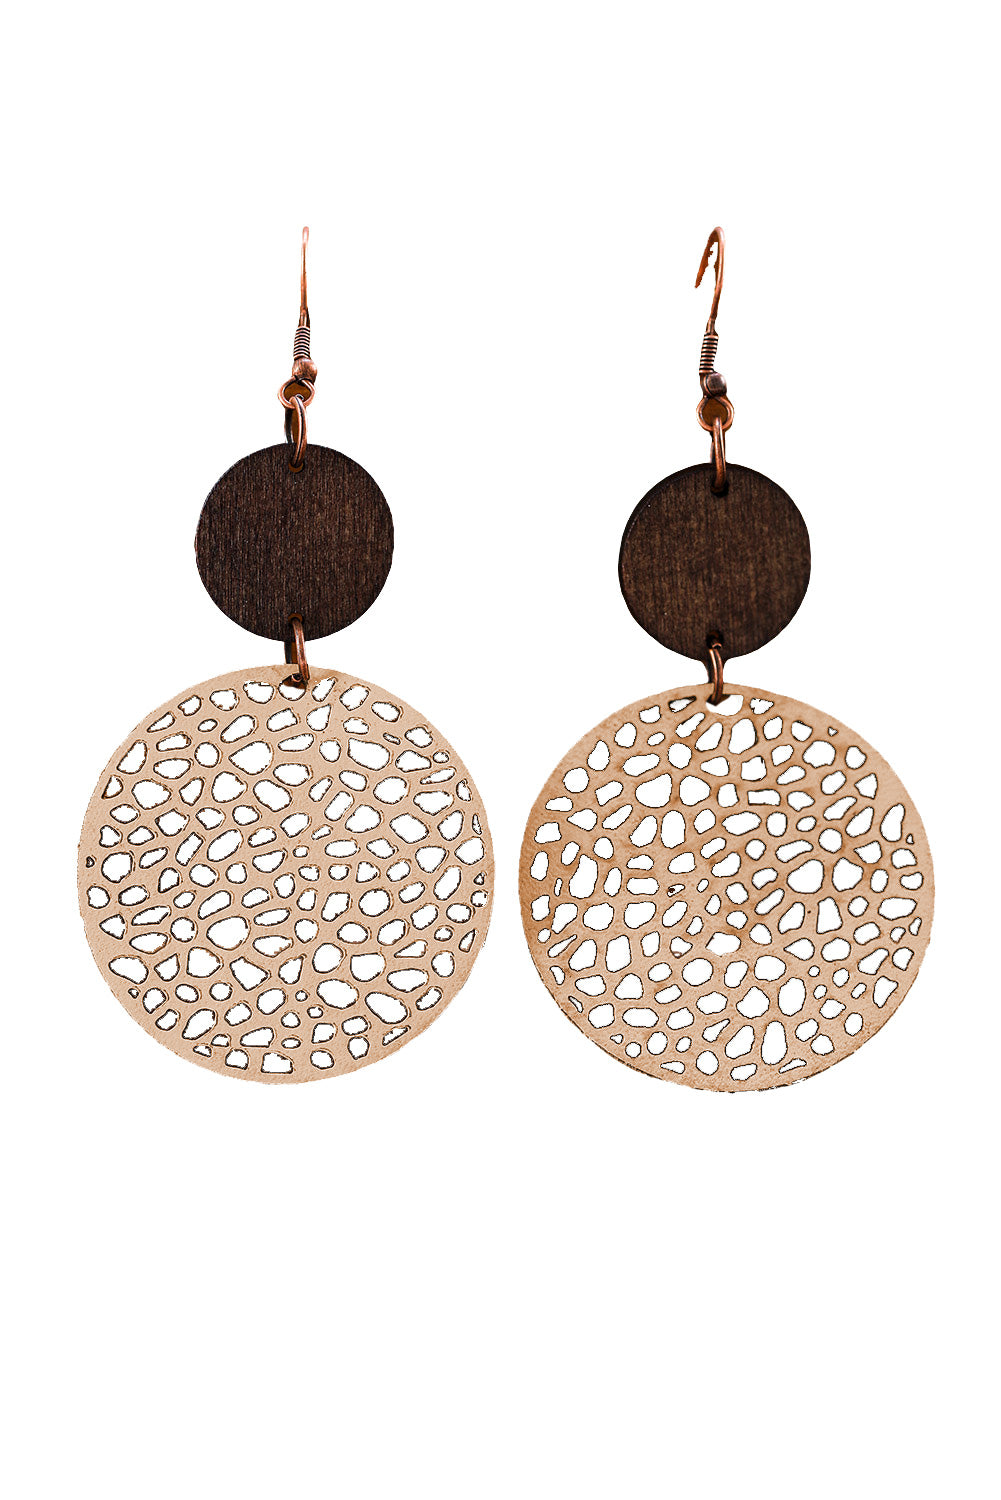 Khaki Hollow Out Wooden Round Drop Earrings